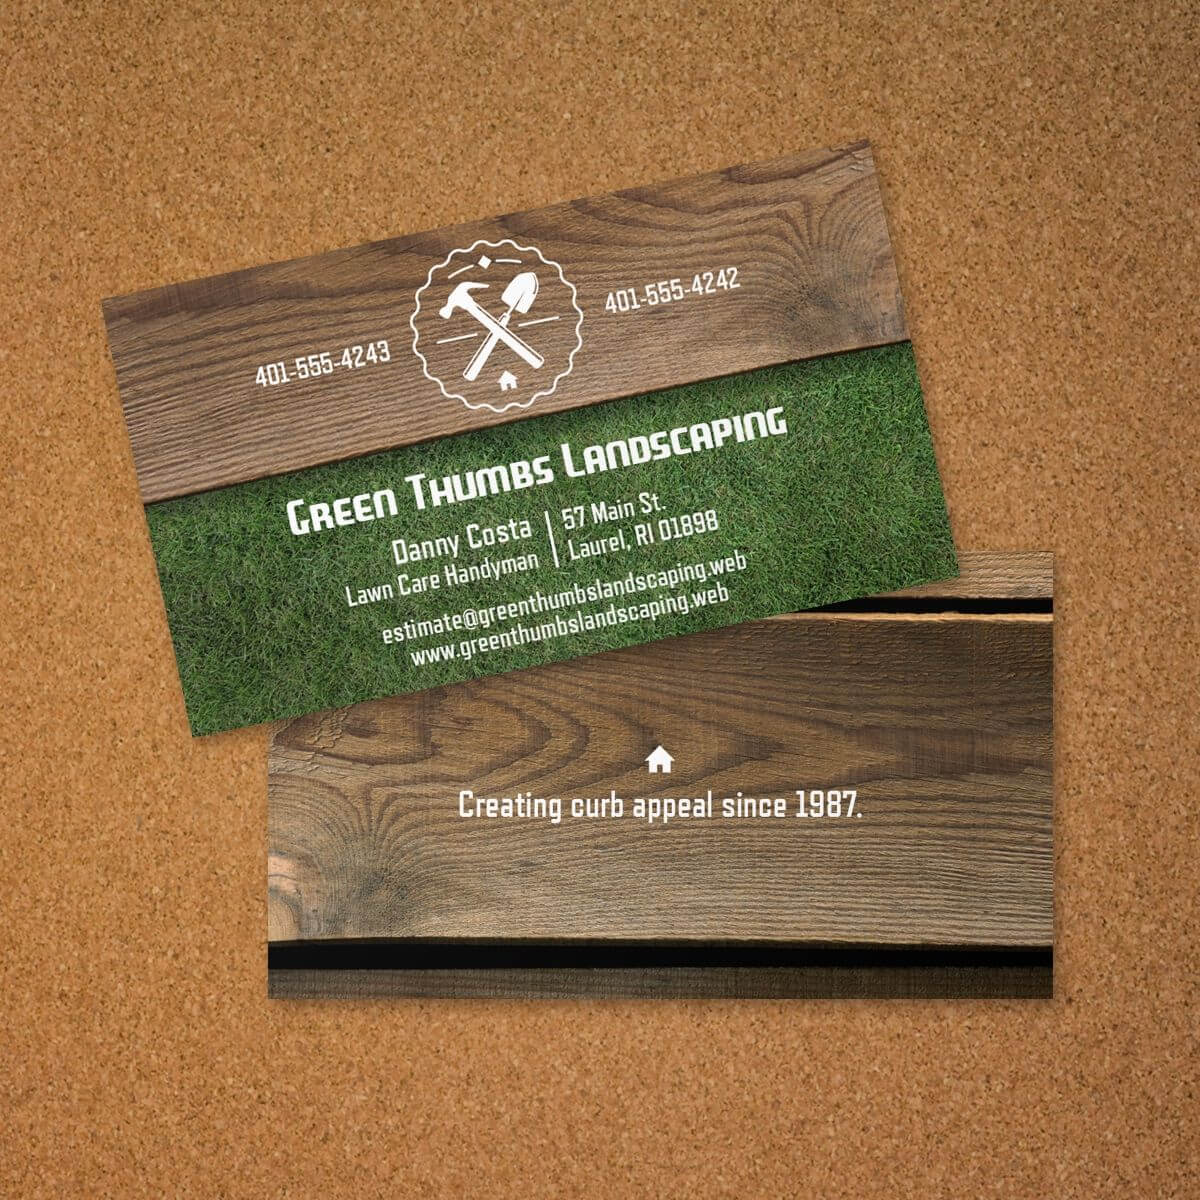 Handyman Business Card Template Image Collections With Regard To Lawn Care Business Cards Templates Free